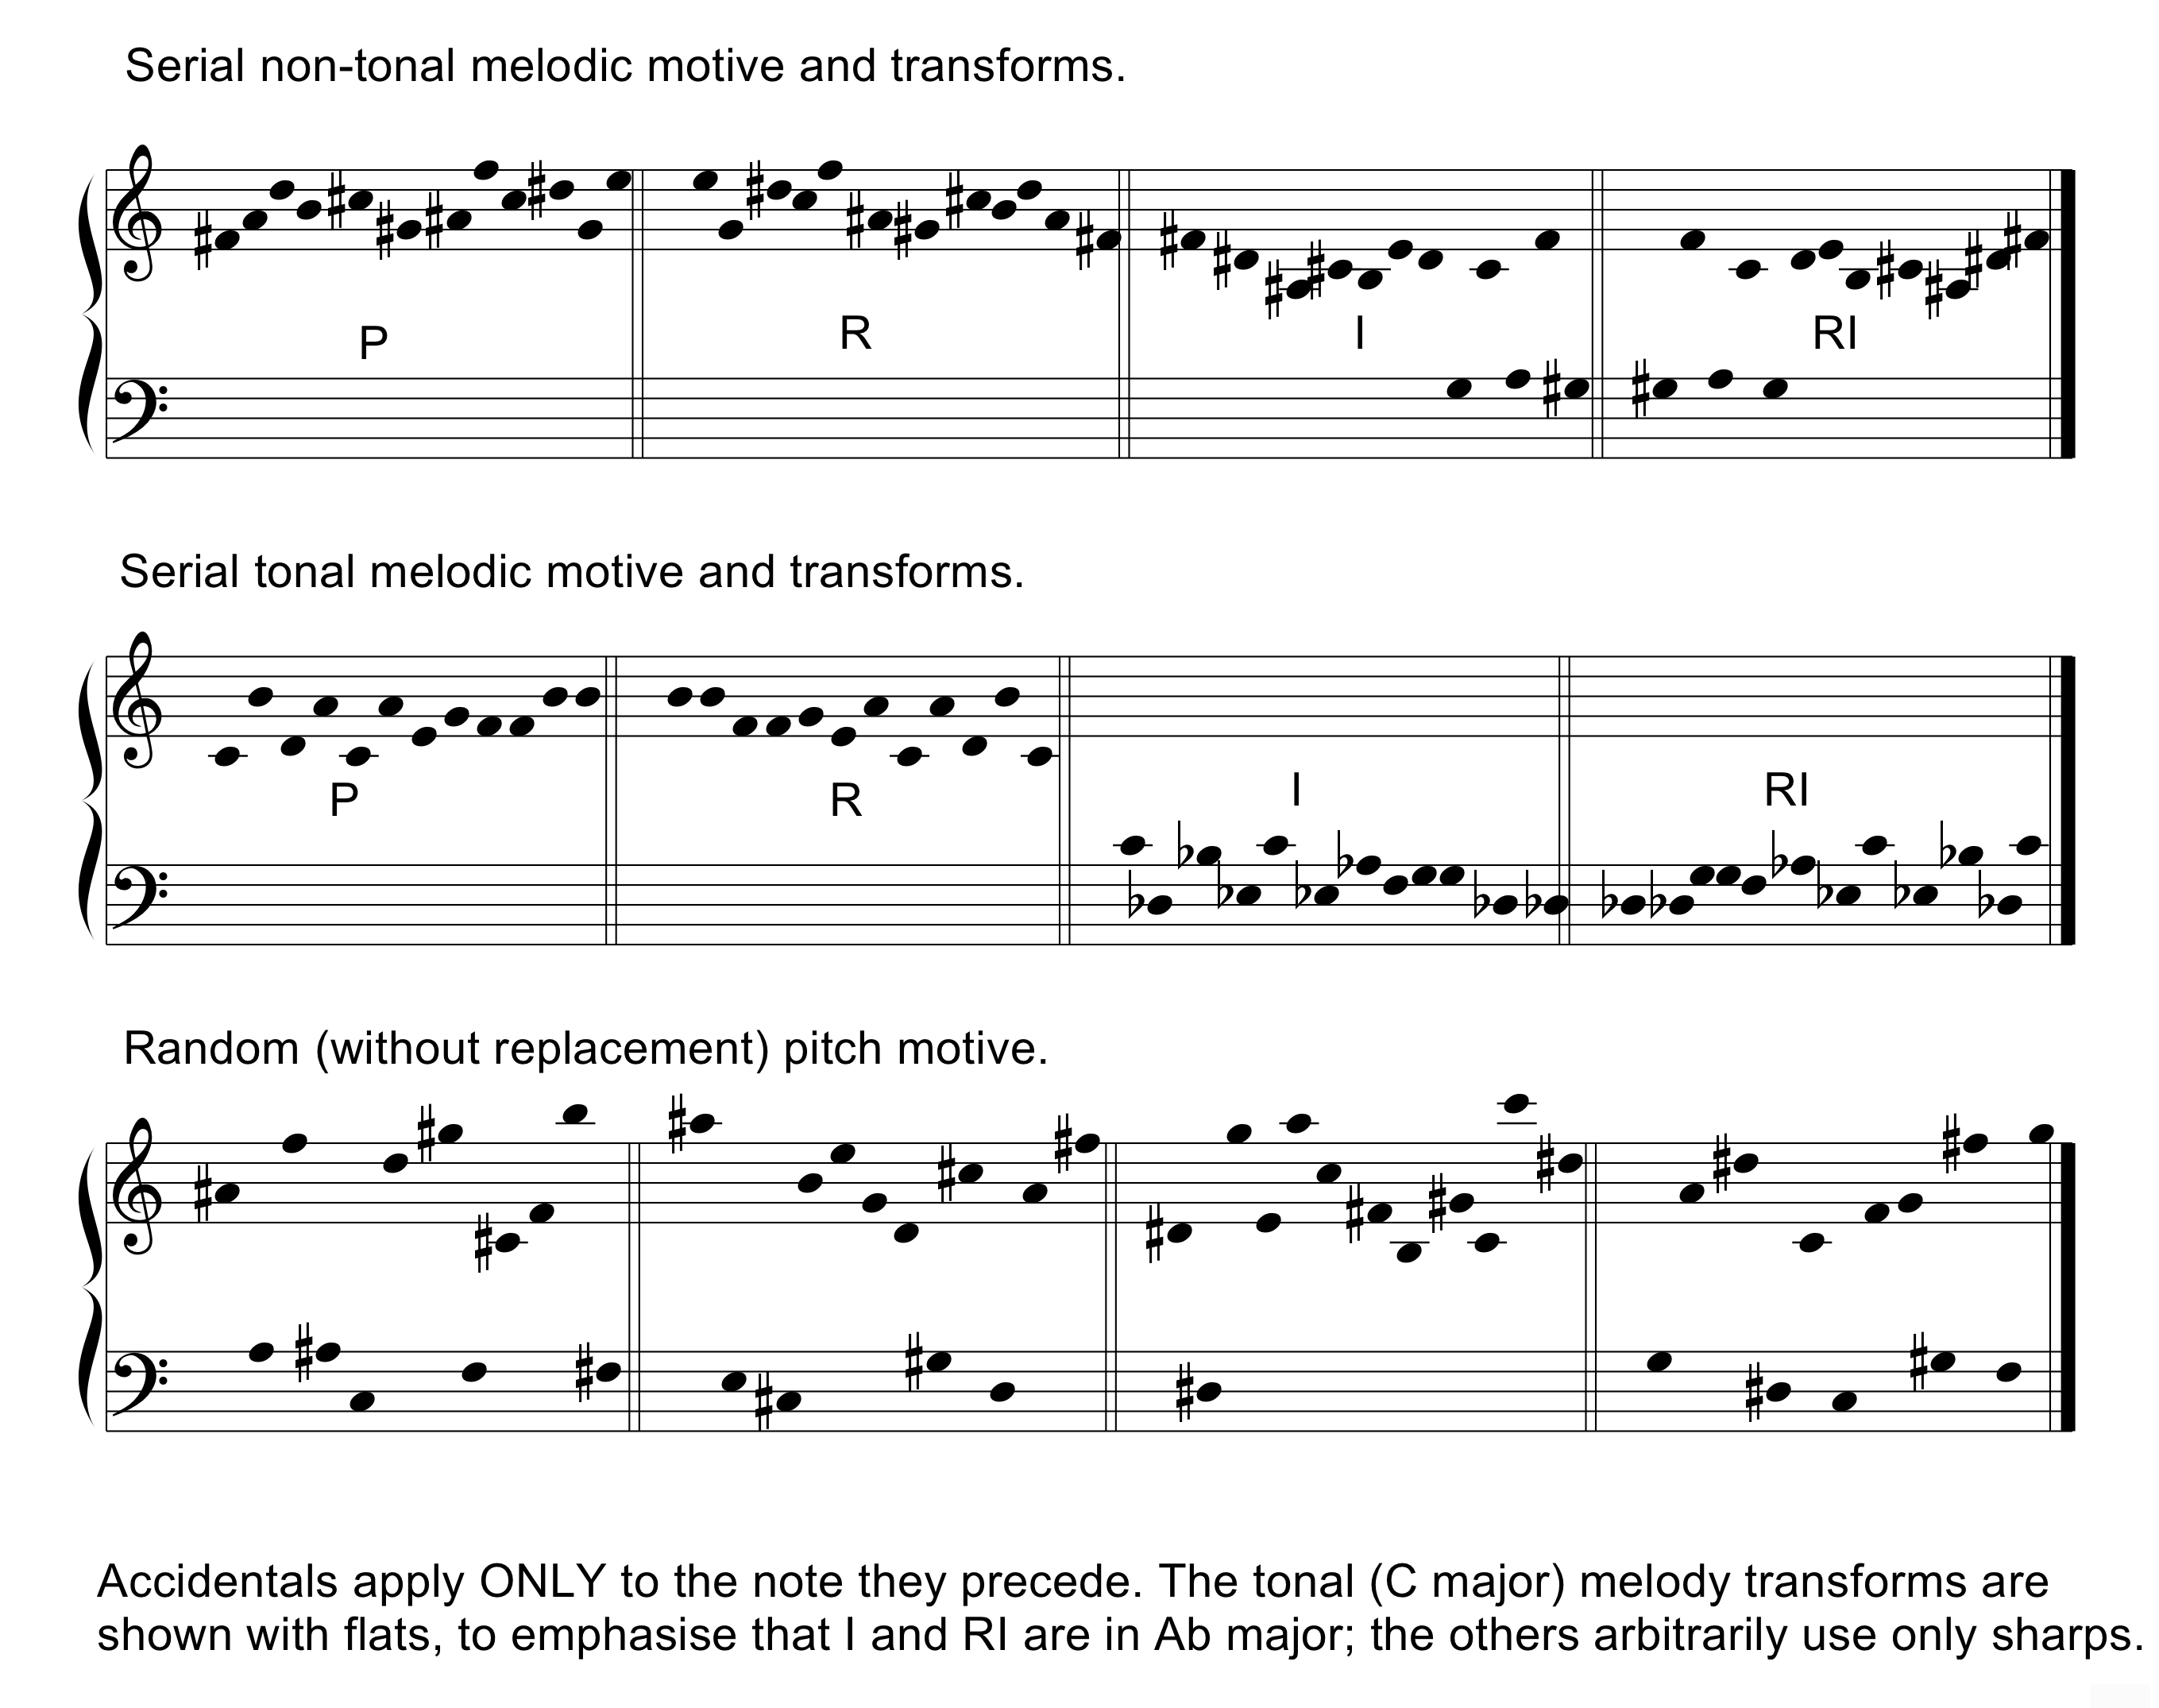 3 sets of 4 bars of musical notation, each showing notes that illustrate an algorithmic melody or transform. Image contains the caption, 'Accidentals apply only to the note they precede. The tonal (C major) melody transforms are shown with flats, to emphasise that I and RI are in A flat major; the others arbitrarily use only sharps.'